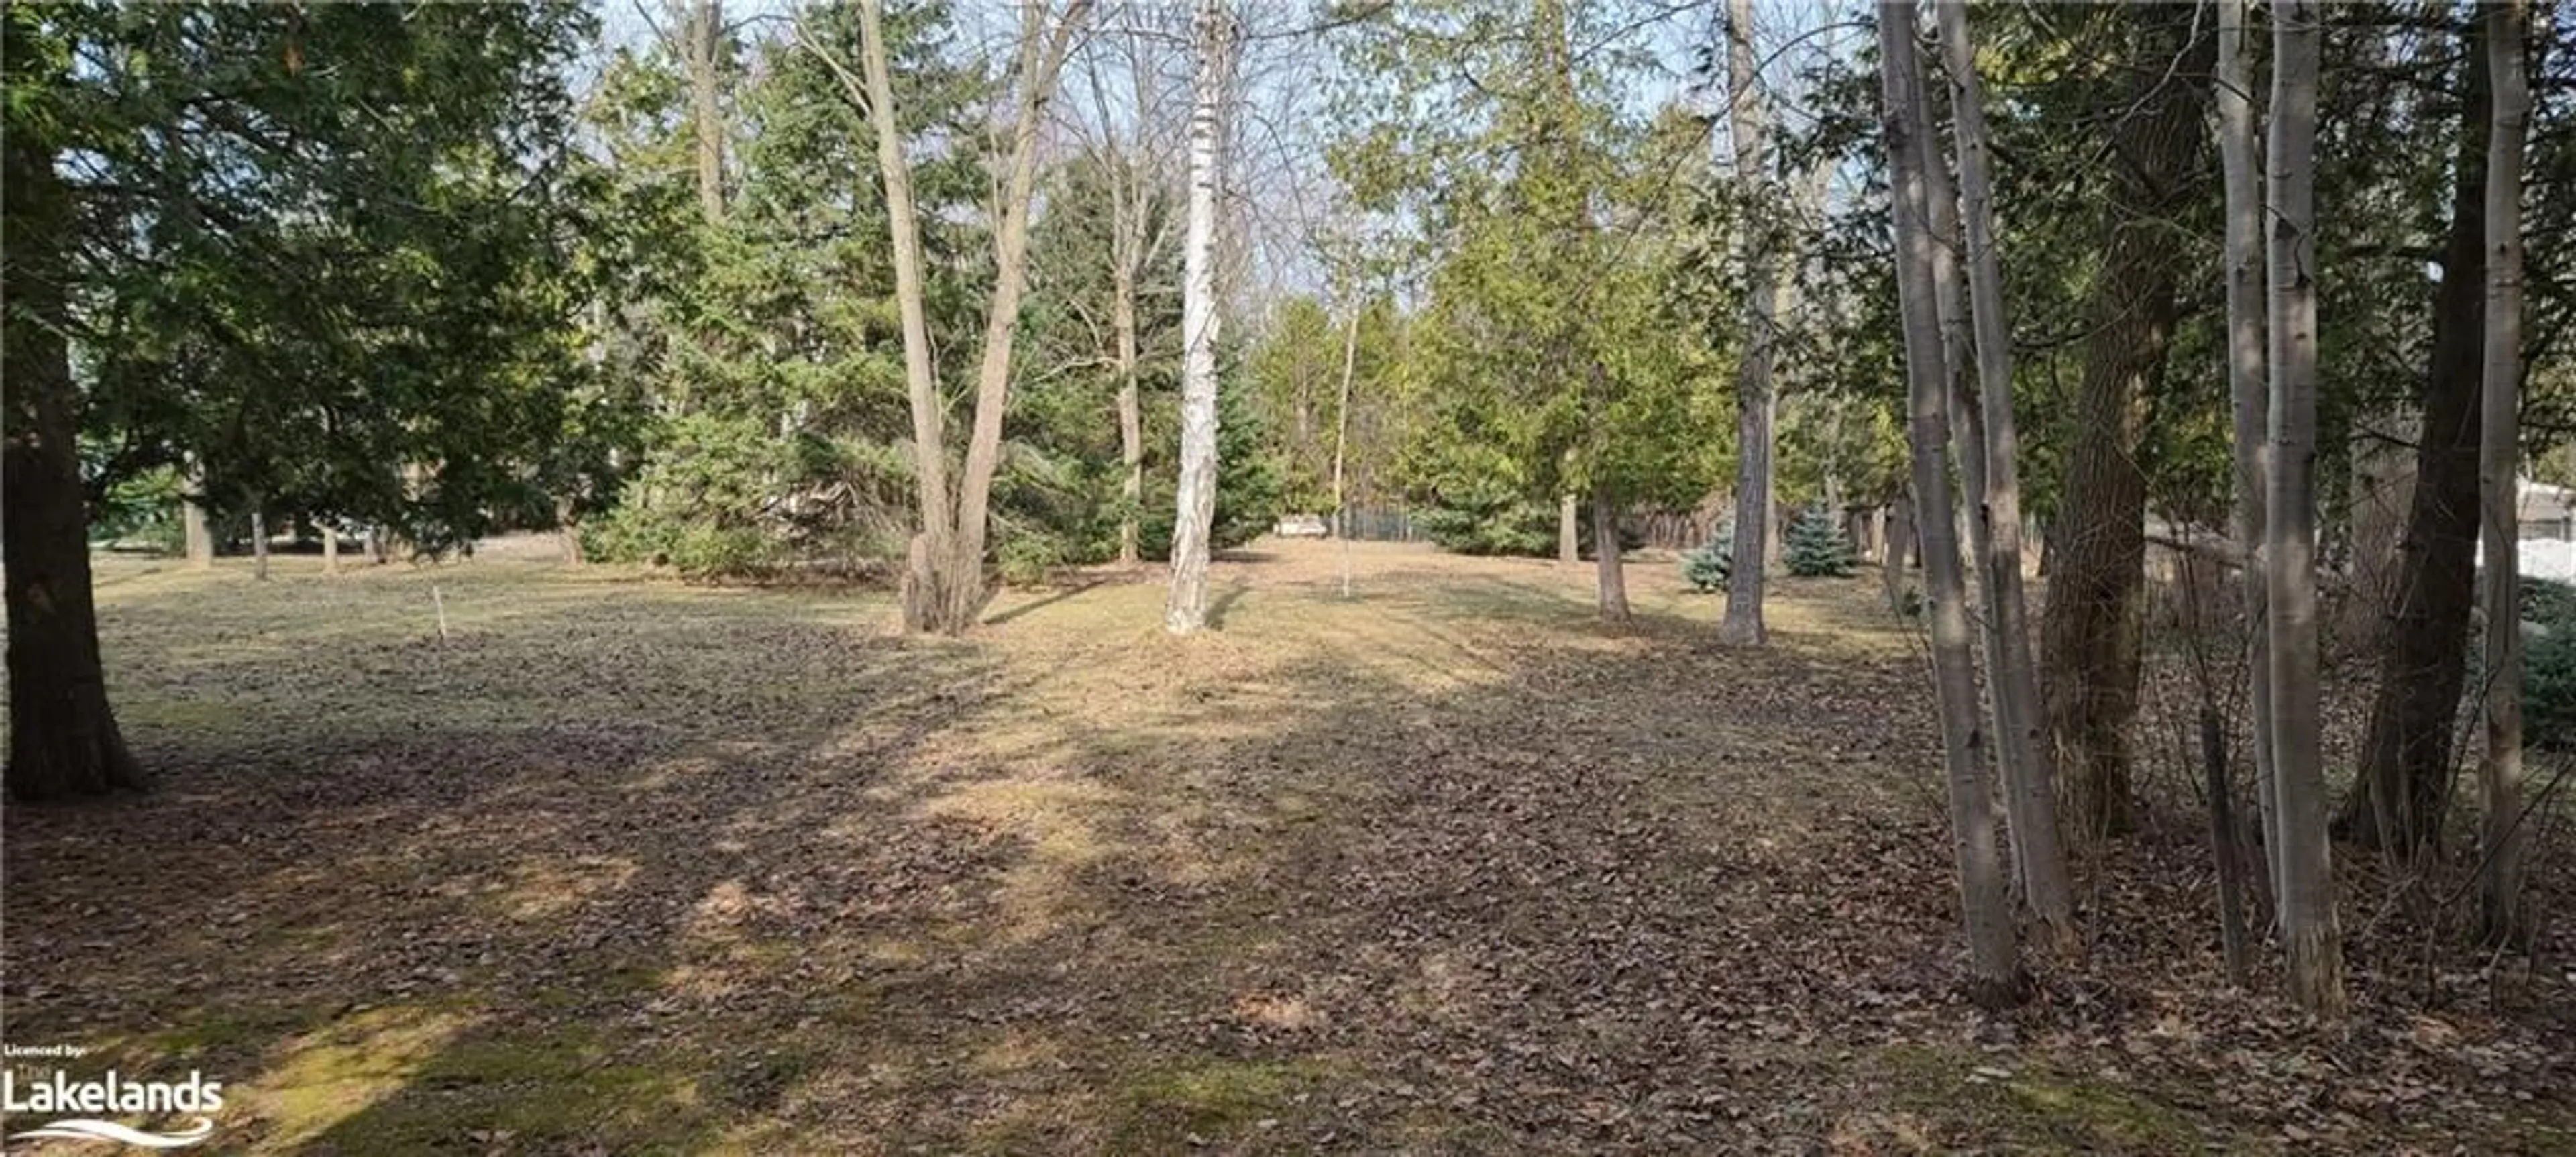 Street view for LOT 24 60 Robert St, Wasaga Beach Ontario L9Z 2Y2